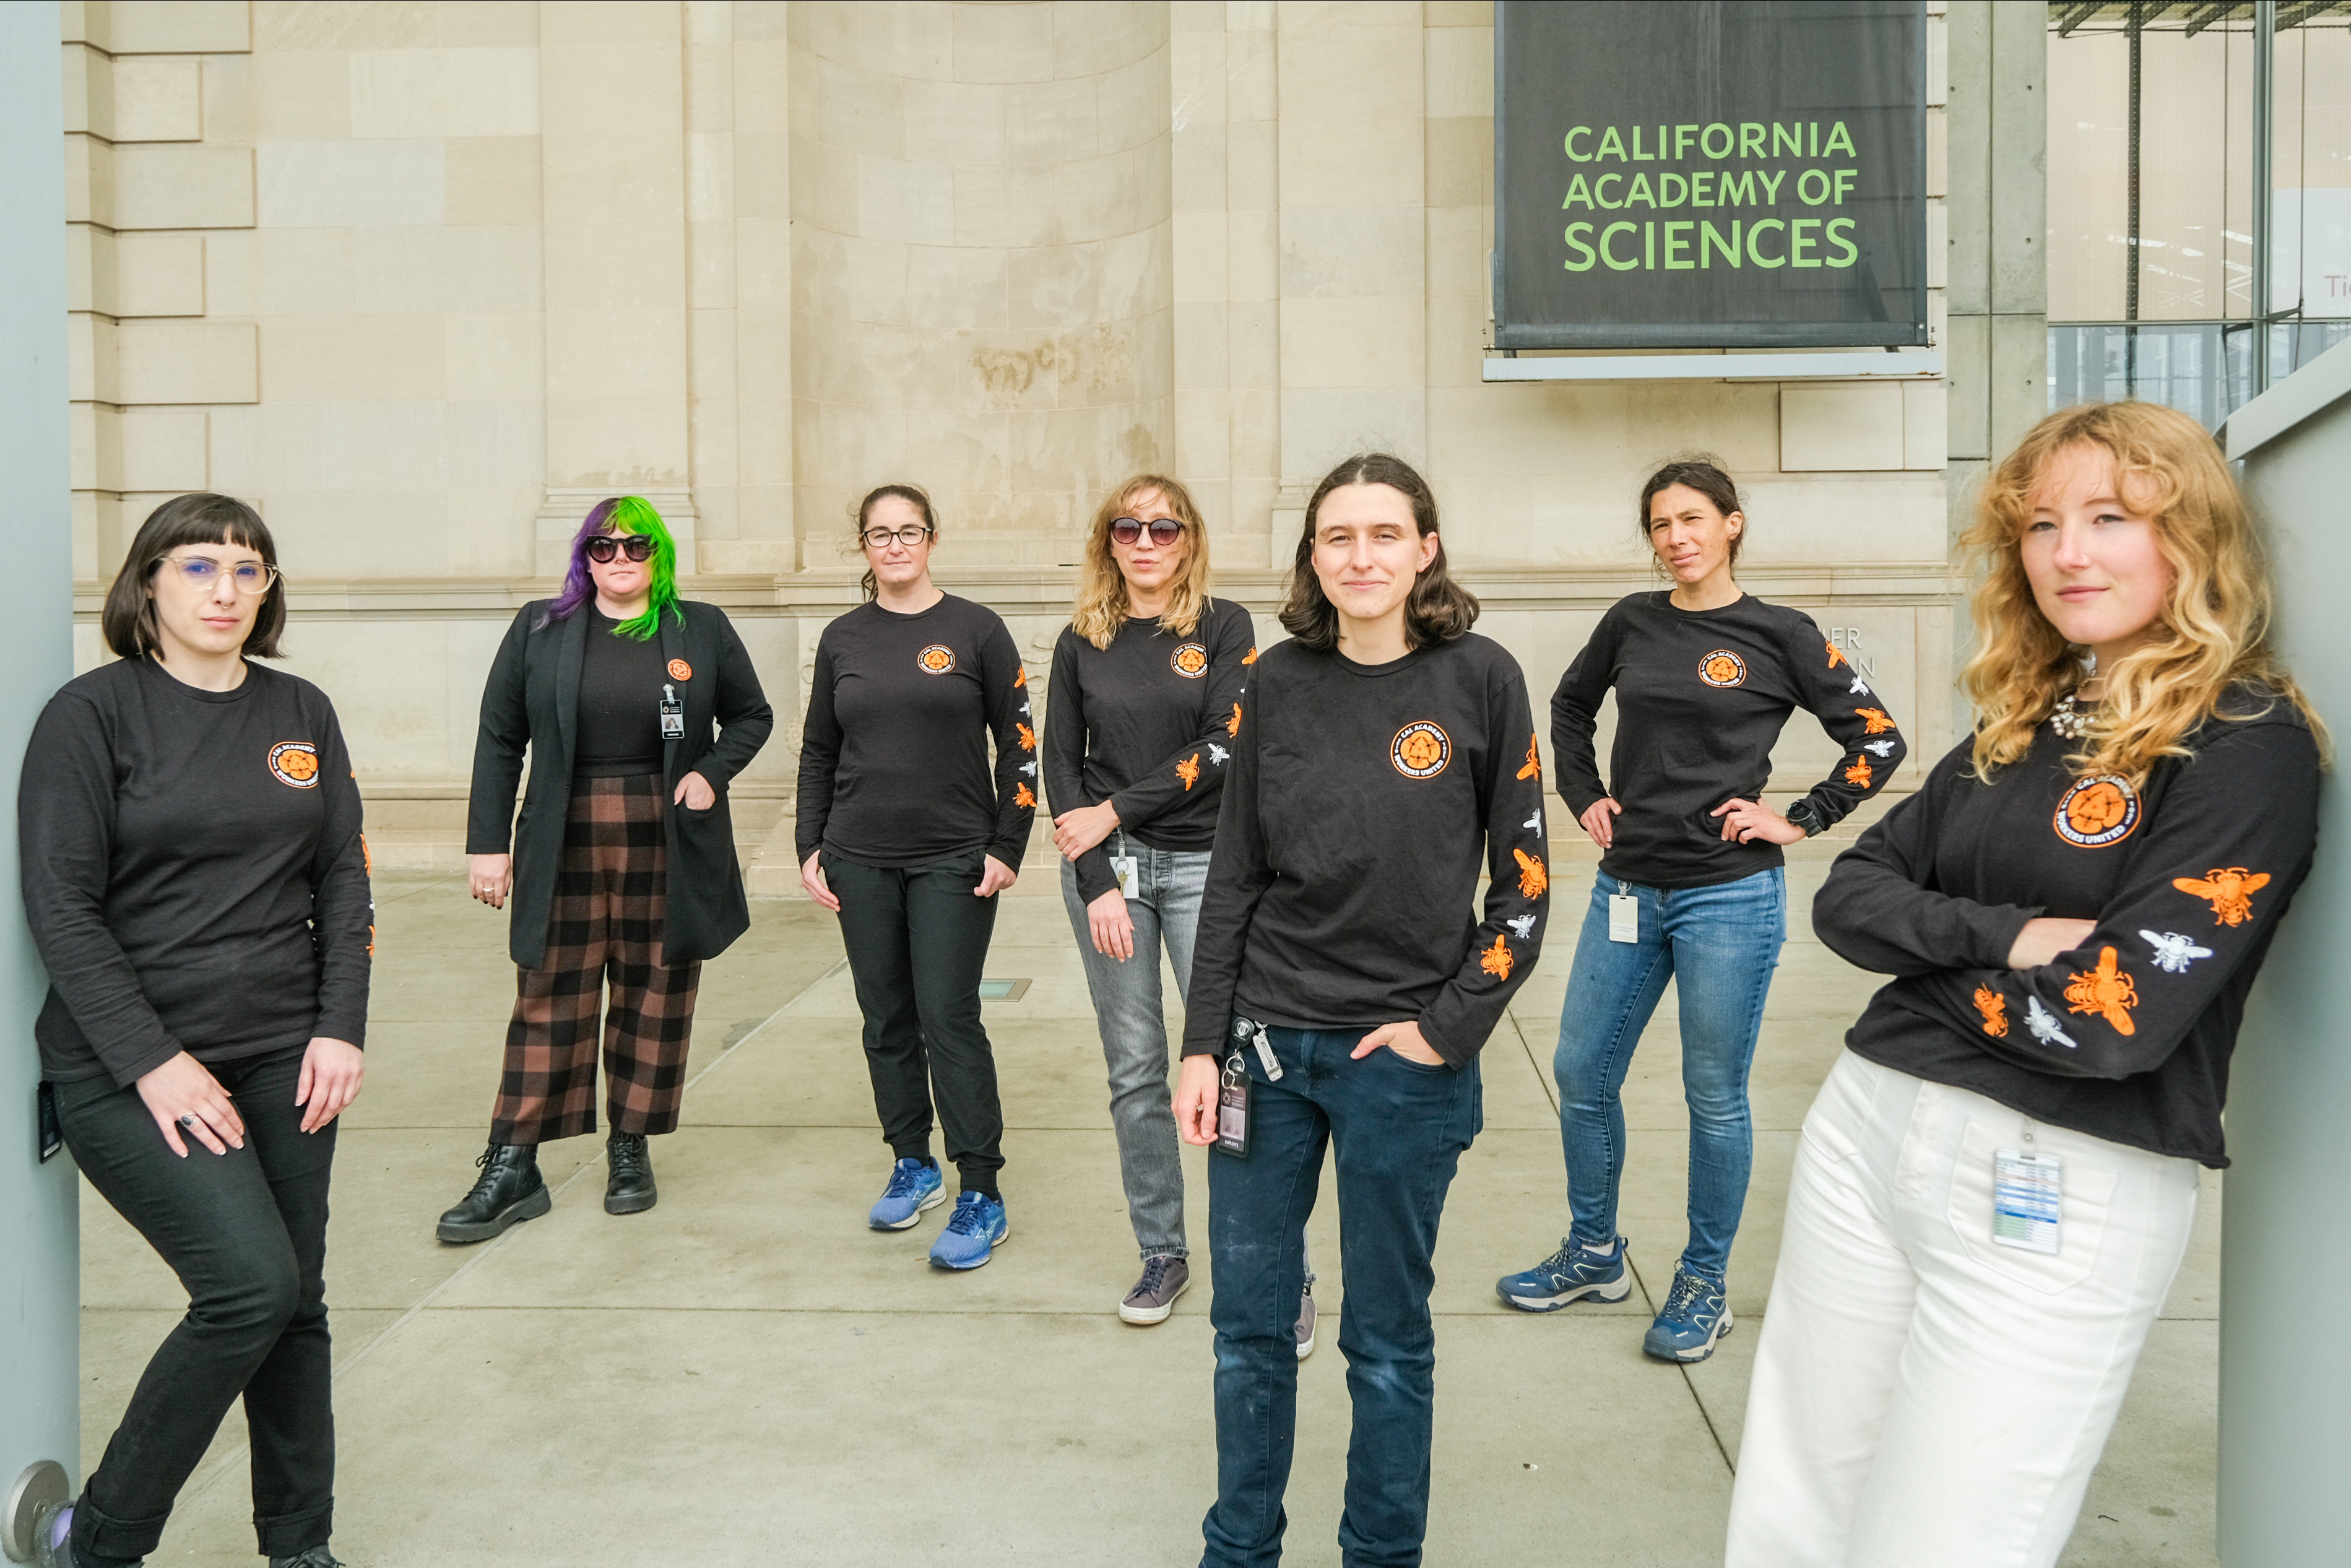 Seven people in black shirts with orange logos stand confidently in front of the California Academy of Sciences.